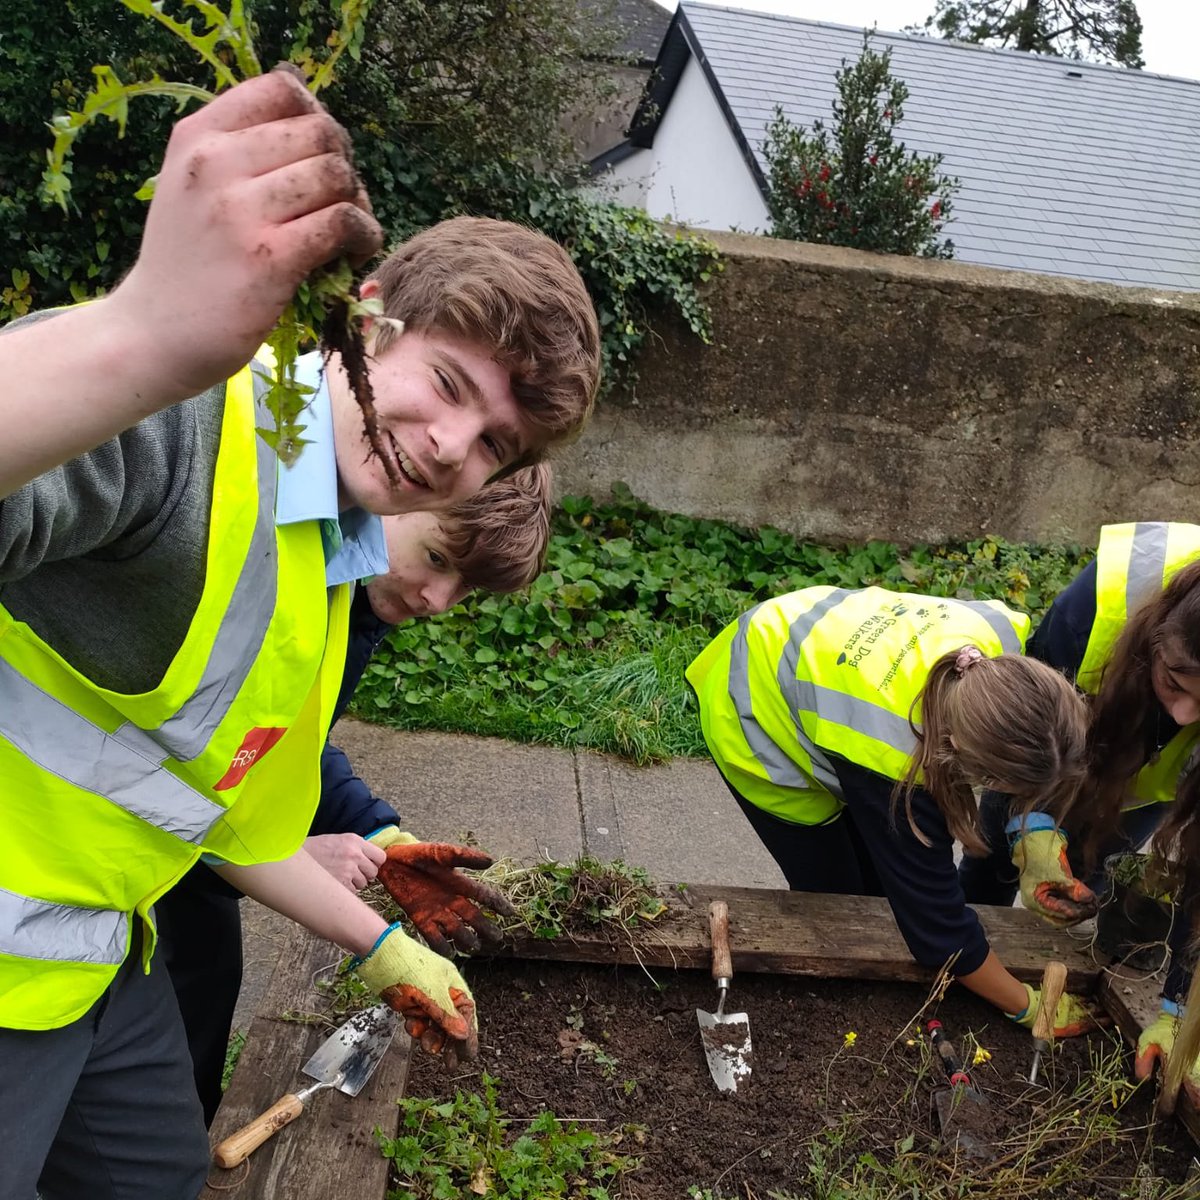 Digging deep #climateactionweek Our Biology students getting hands on with the Wexford Edible towns project Prepping beds, collecting seeds for our garden composting & tasting the spoils of the season
@climate_ambass @GreenSchoolsIre @wexfordtidytown @SETUHort  #community #care